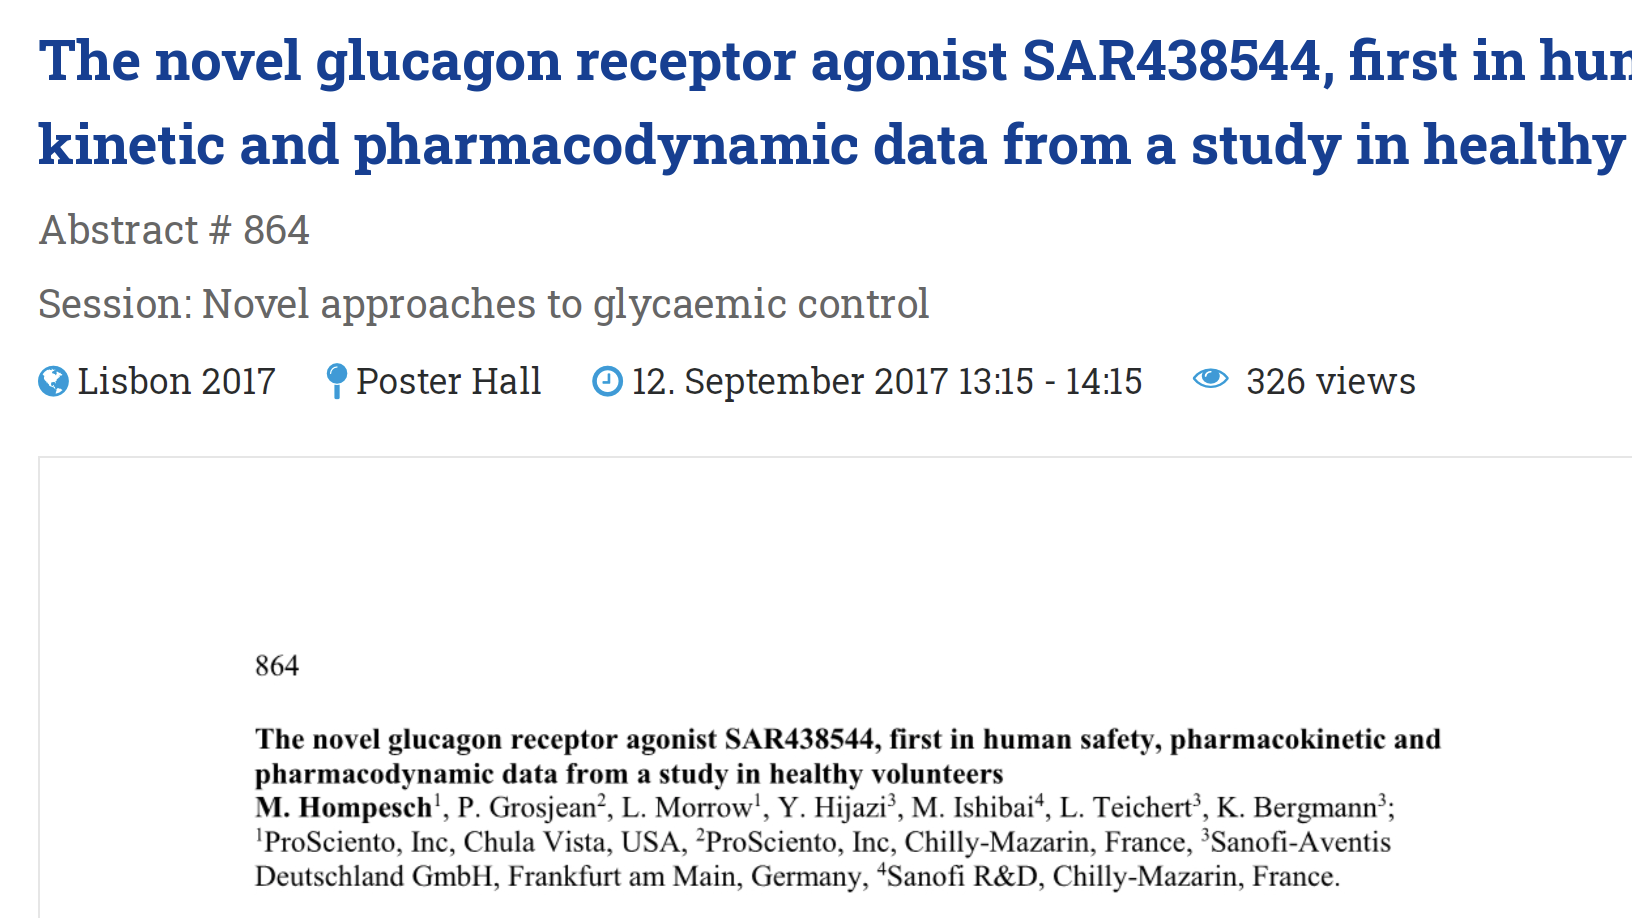 The novel glucagon receptor agonist SAR438544, first in human safety, pharmacokinetic and pharmacodynamic data from a study in healthy volunteers thumbnail